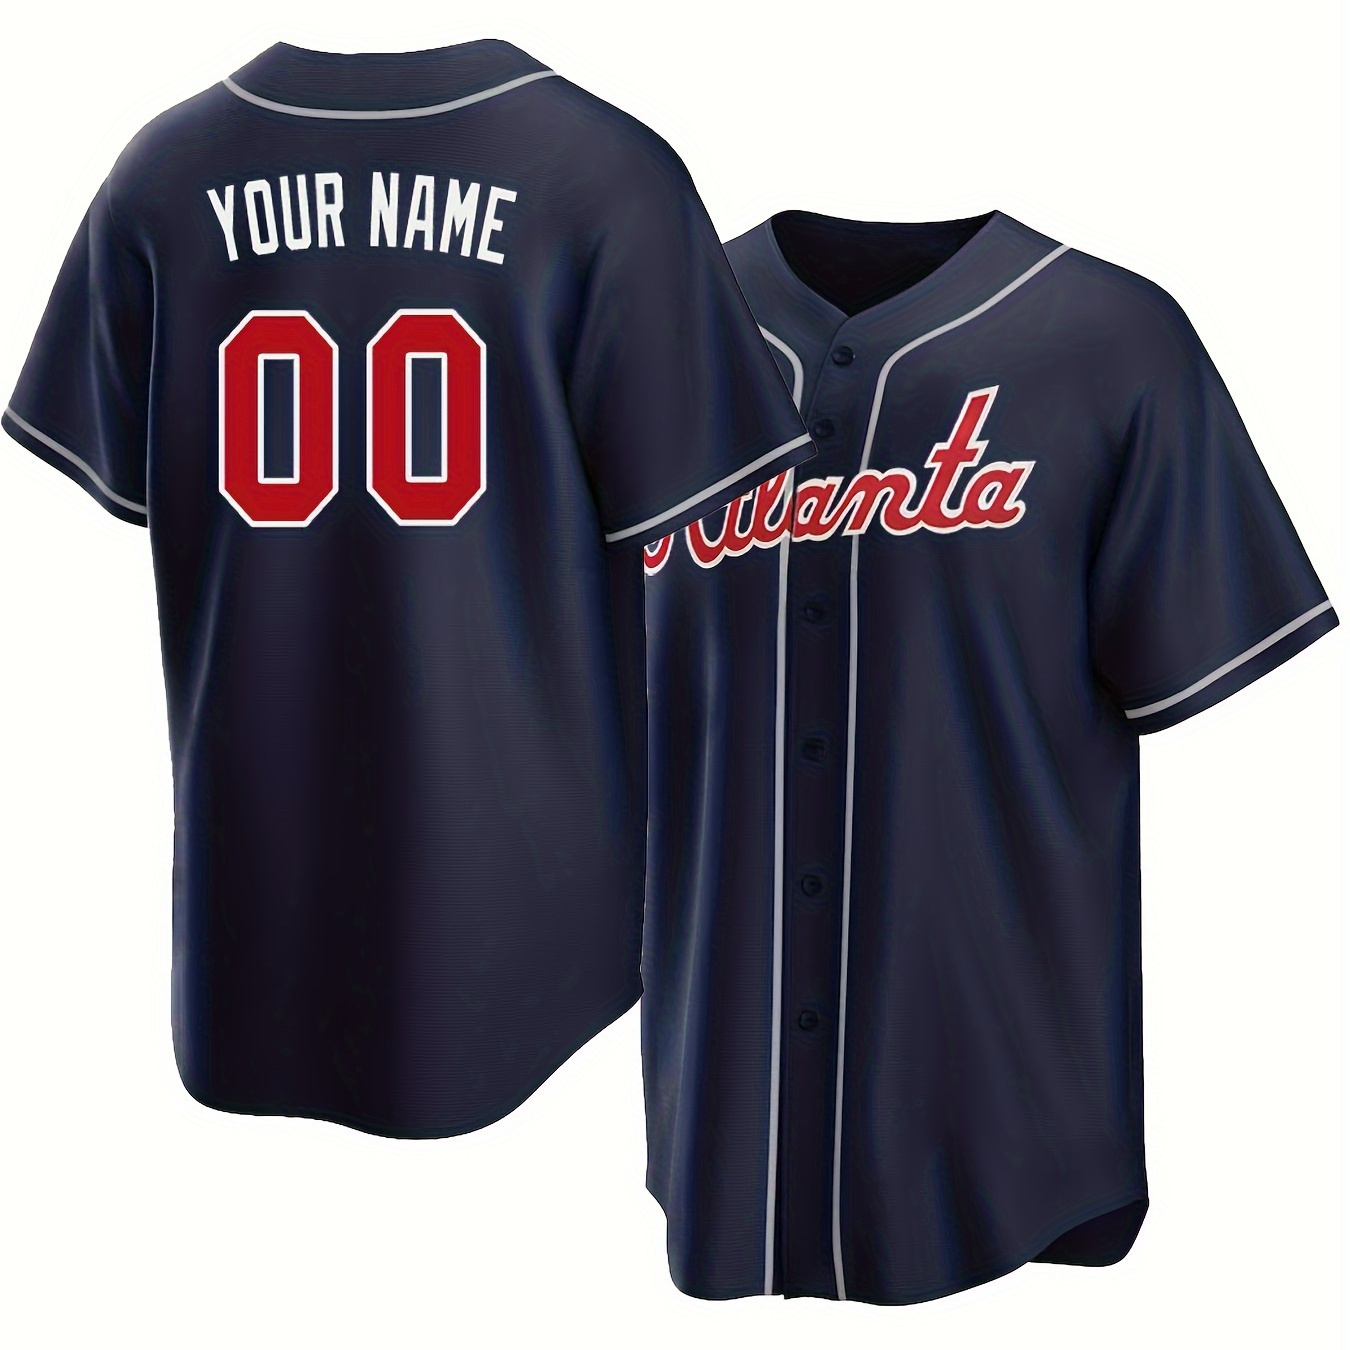 

Men's Customized Name & Number Embroidery Baseball Jersey, Tailored To Your Preference, Comfy Top For Summer Sport